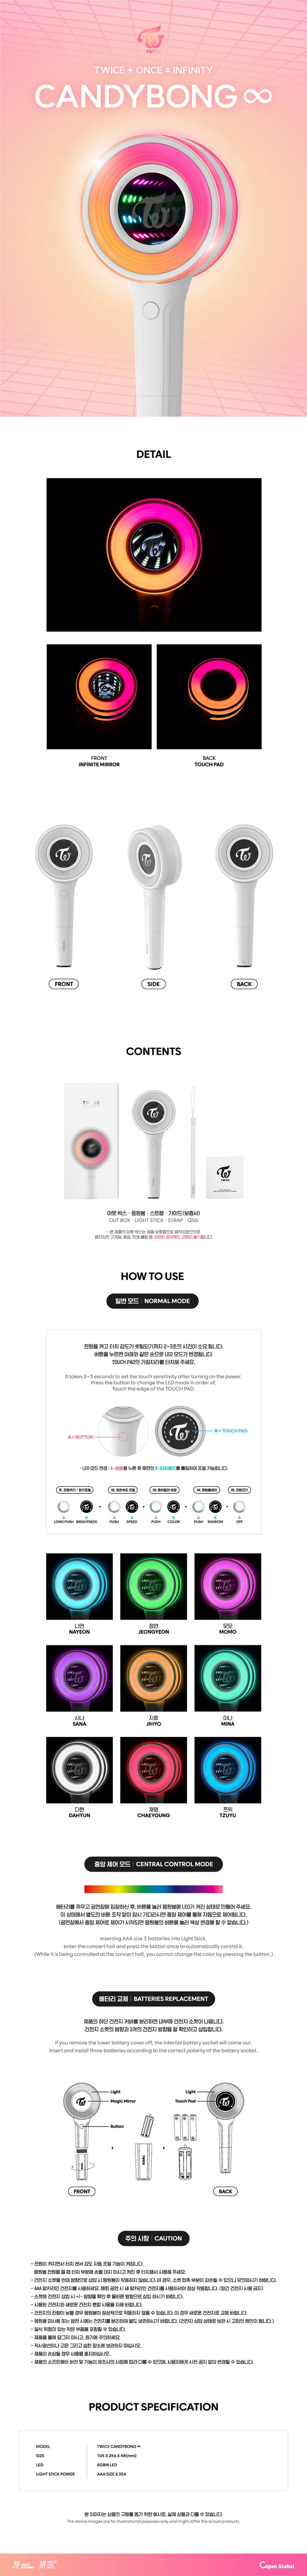 TWICE Official Lightstick CANDYBONG ∞ | UK Tracked Shipping Kpop Shop